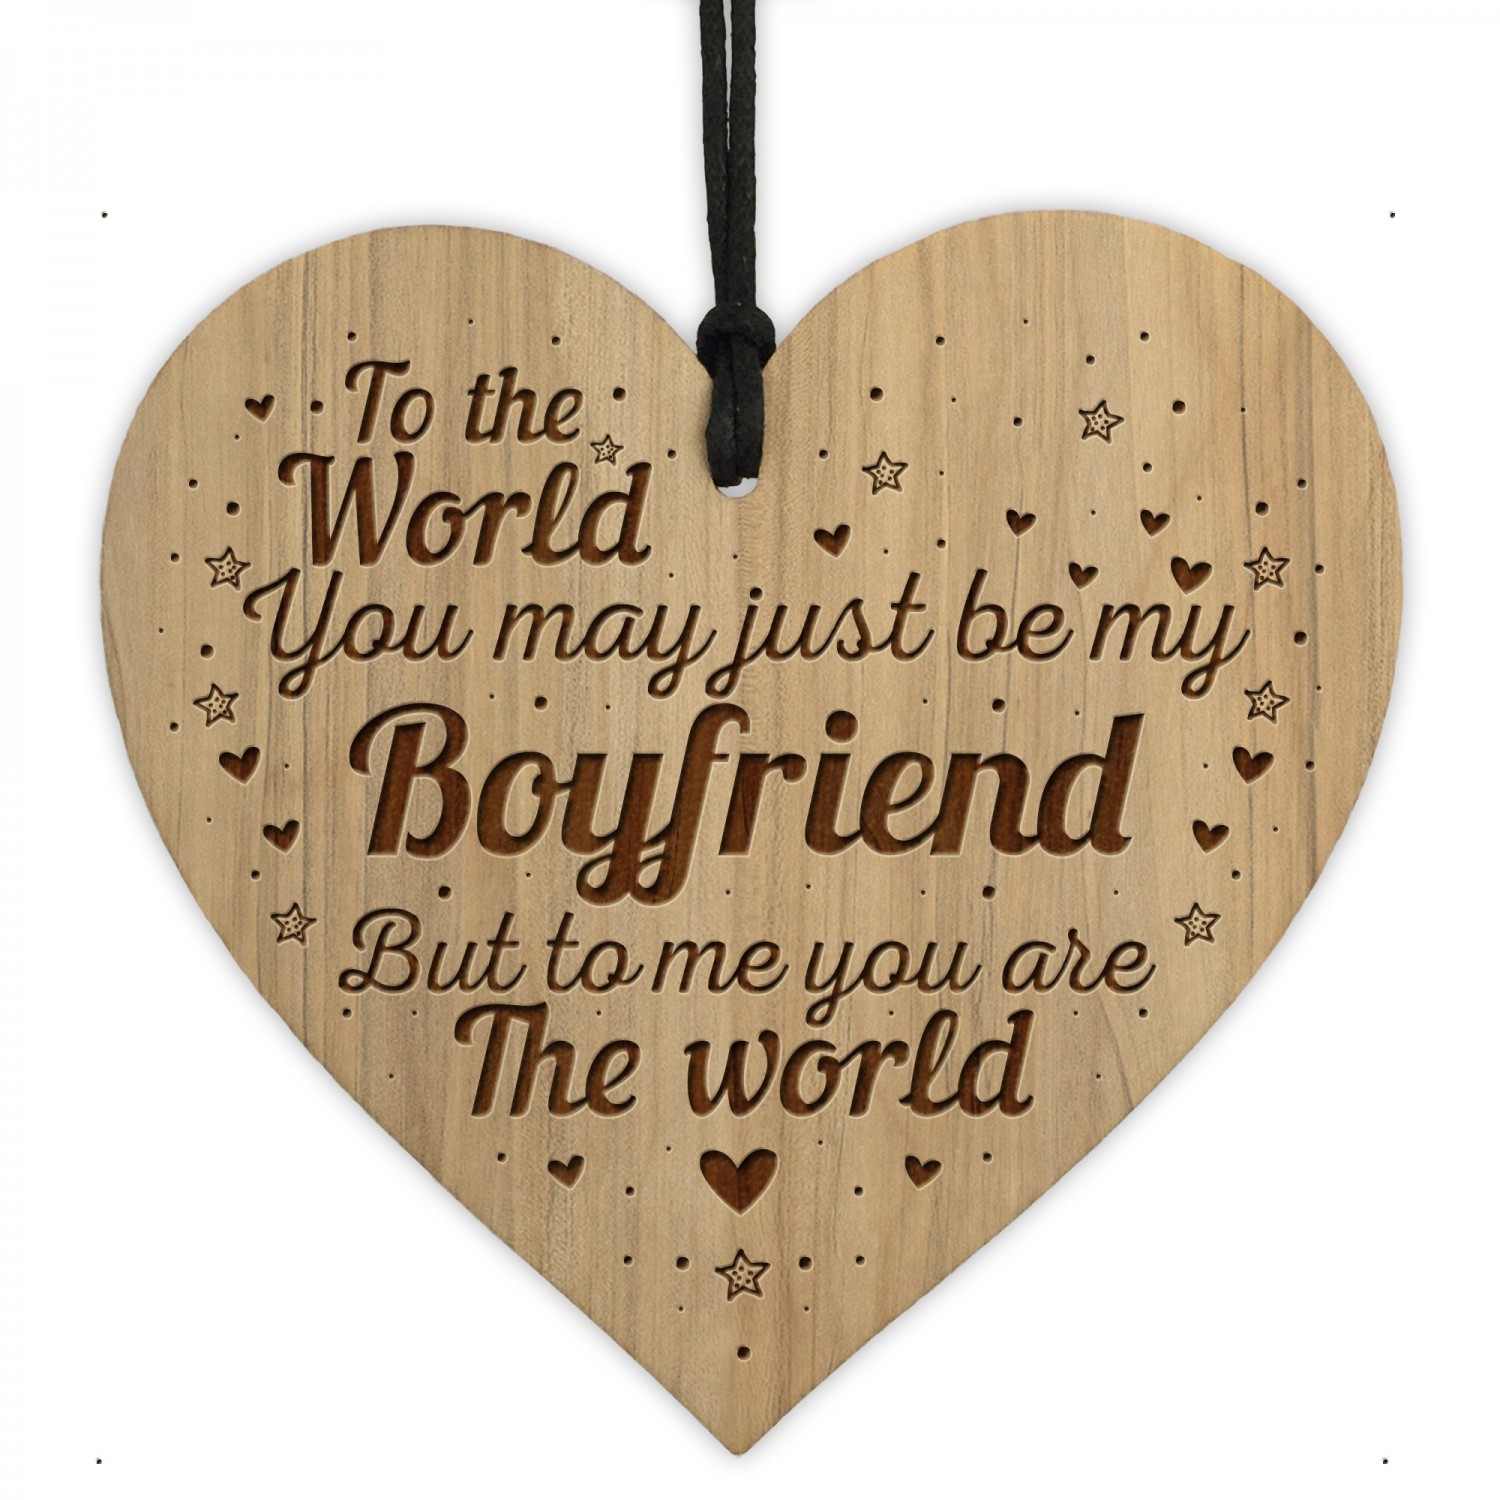 Unique Romantic Gifts For Him & Her | Personalization Mall